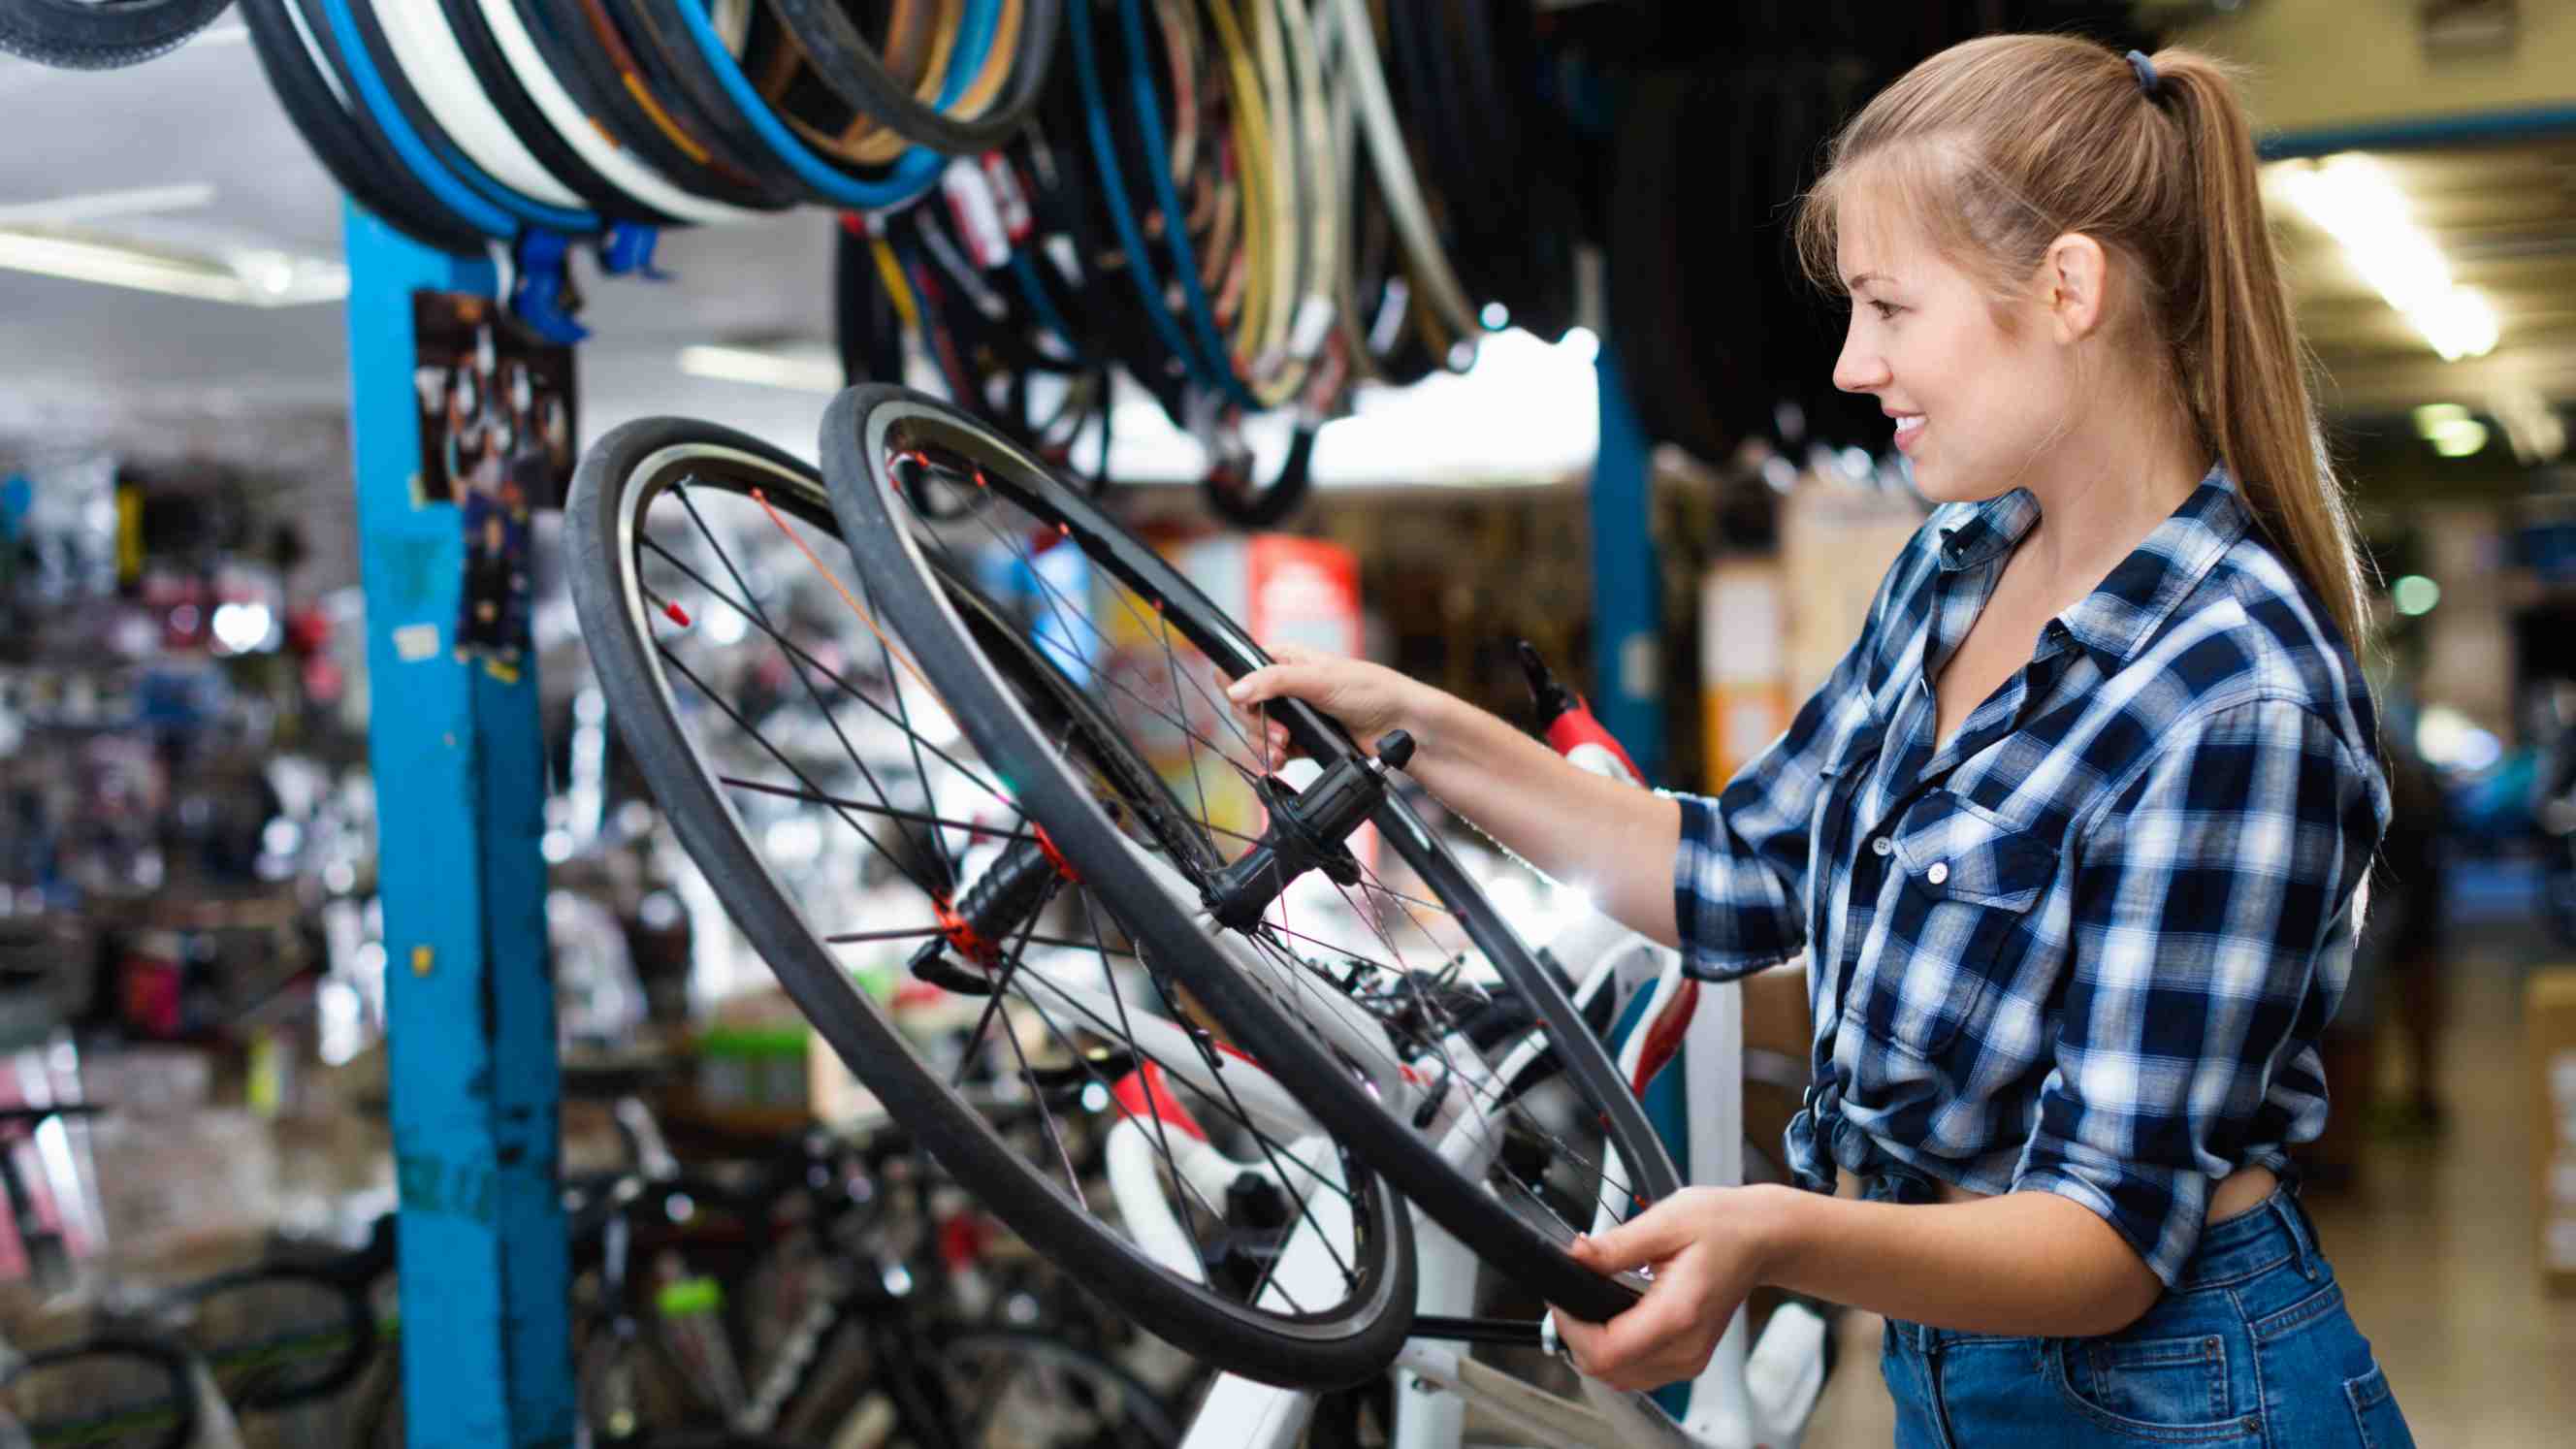 tubeless vs. tube: happy female choosing between a tubless or tube tire system for her bicycle